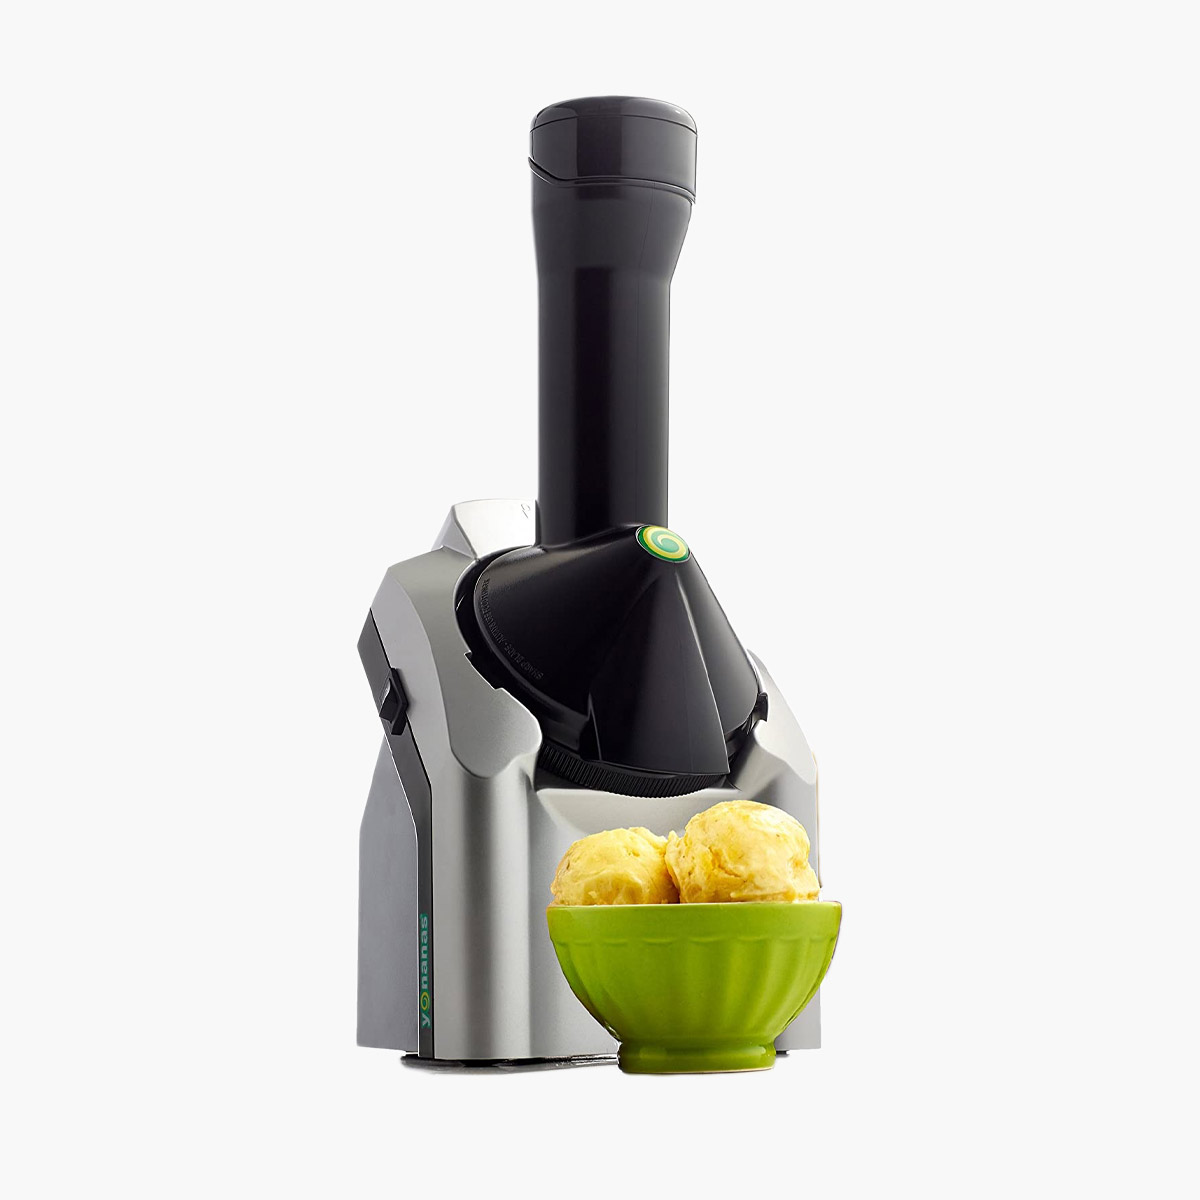 A Yonanas fruit soft serve maker with a bowl of homemade yellow soft serve in front of it.